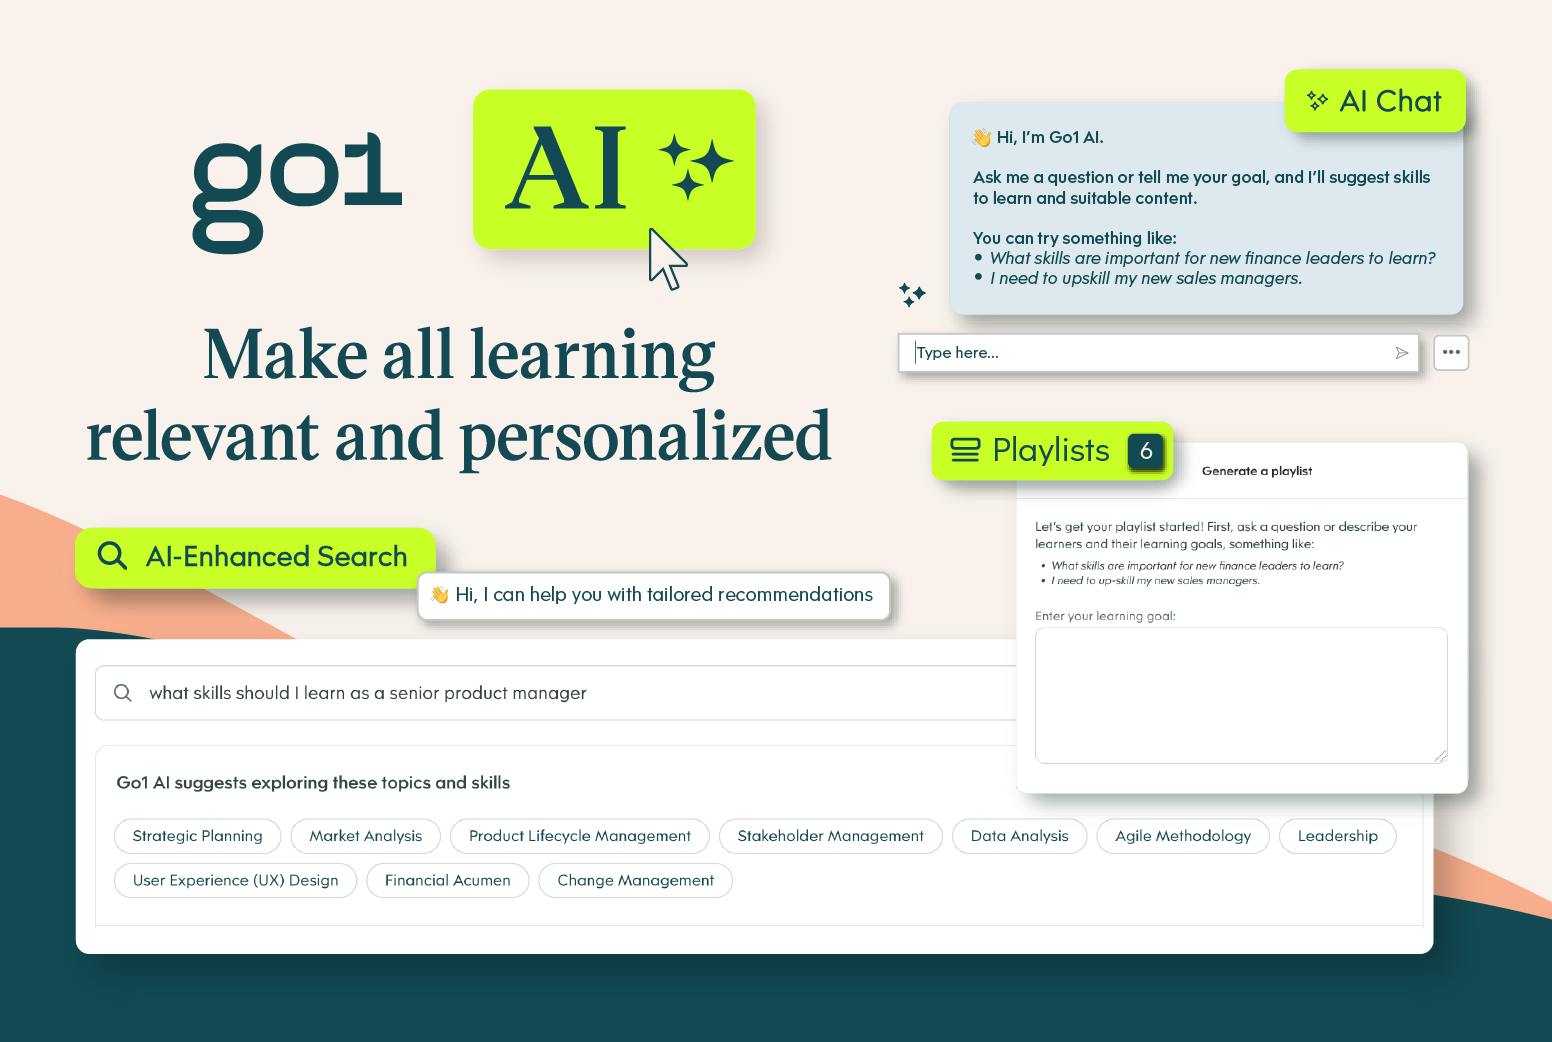 Go1 AI make all learning relevant and personalized